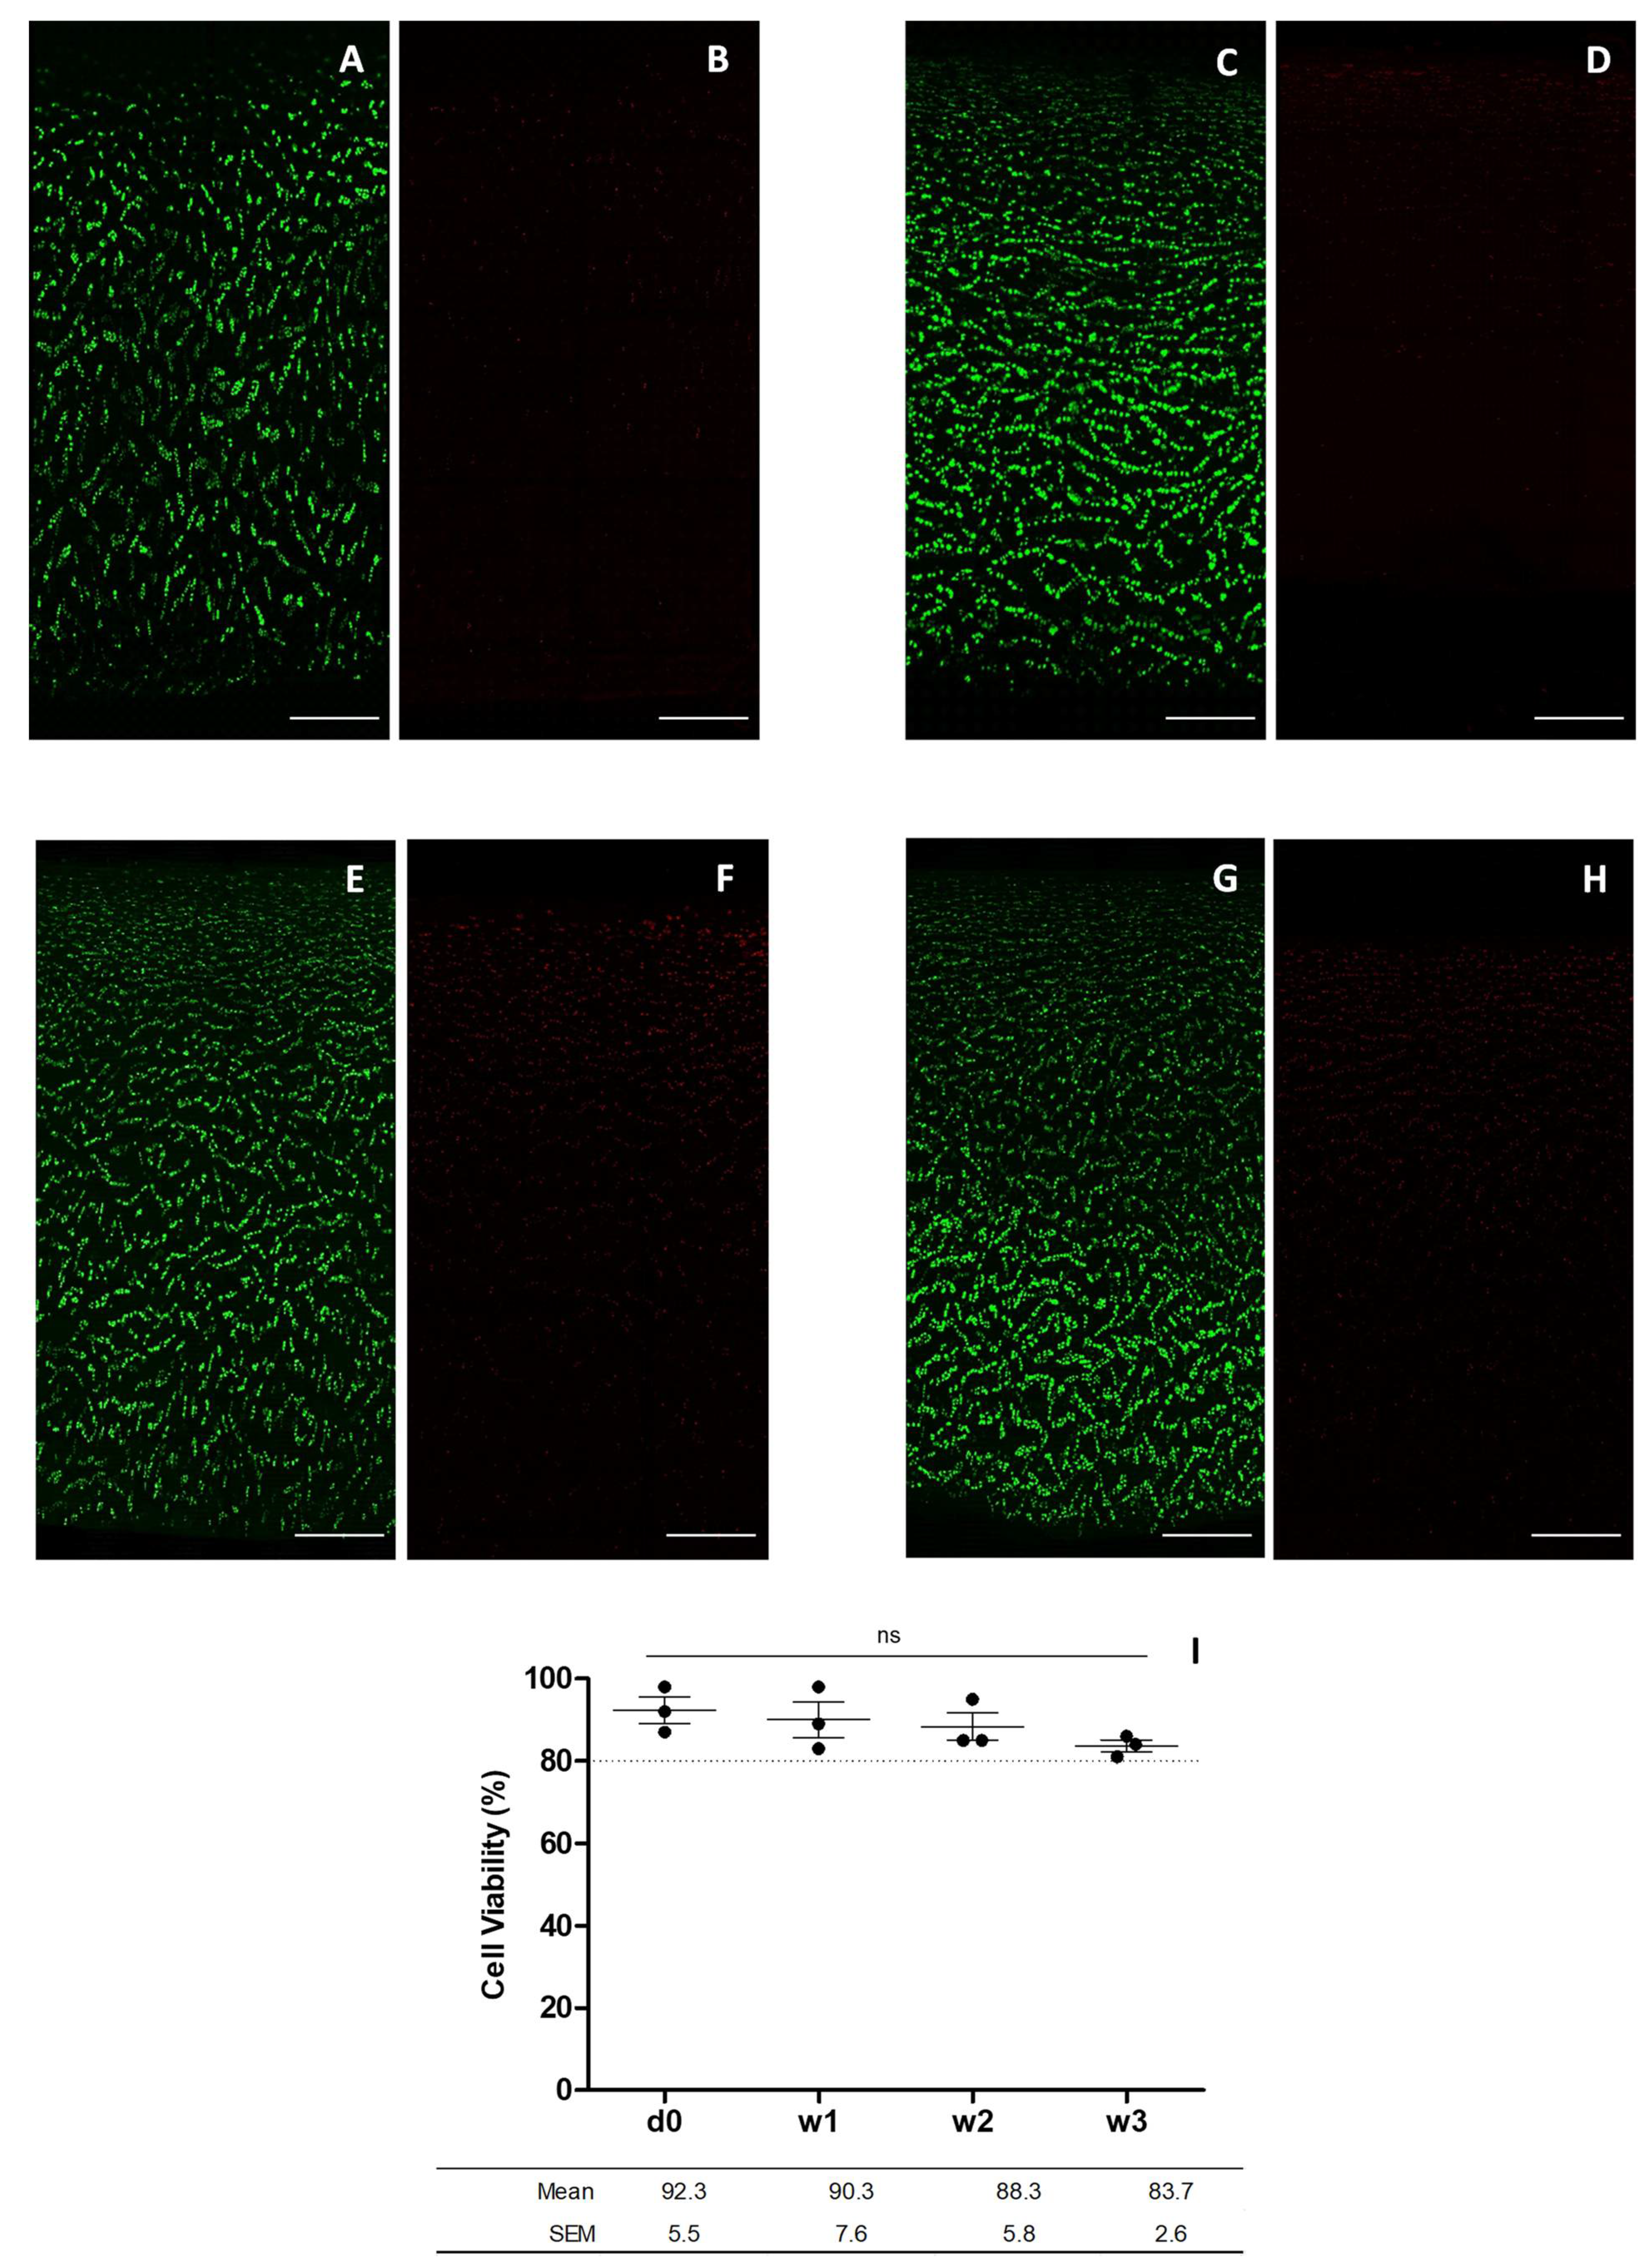 Bioengineering | Free Full-Text | A Comparative Study Using Fluorescent  Confocal Microscopy and Flow Cytometry to Evaluate Chondrocyte Viability in  Human Osteochondral Allografts